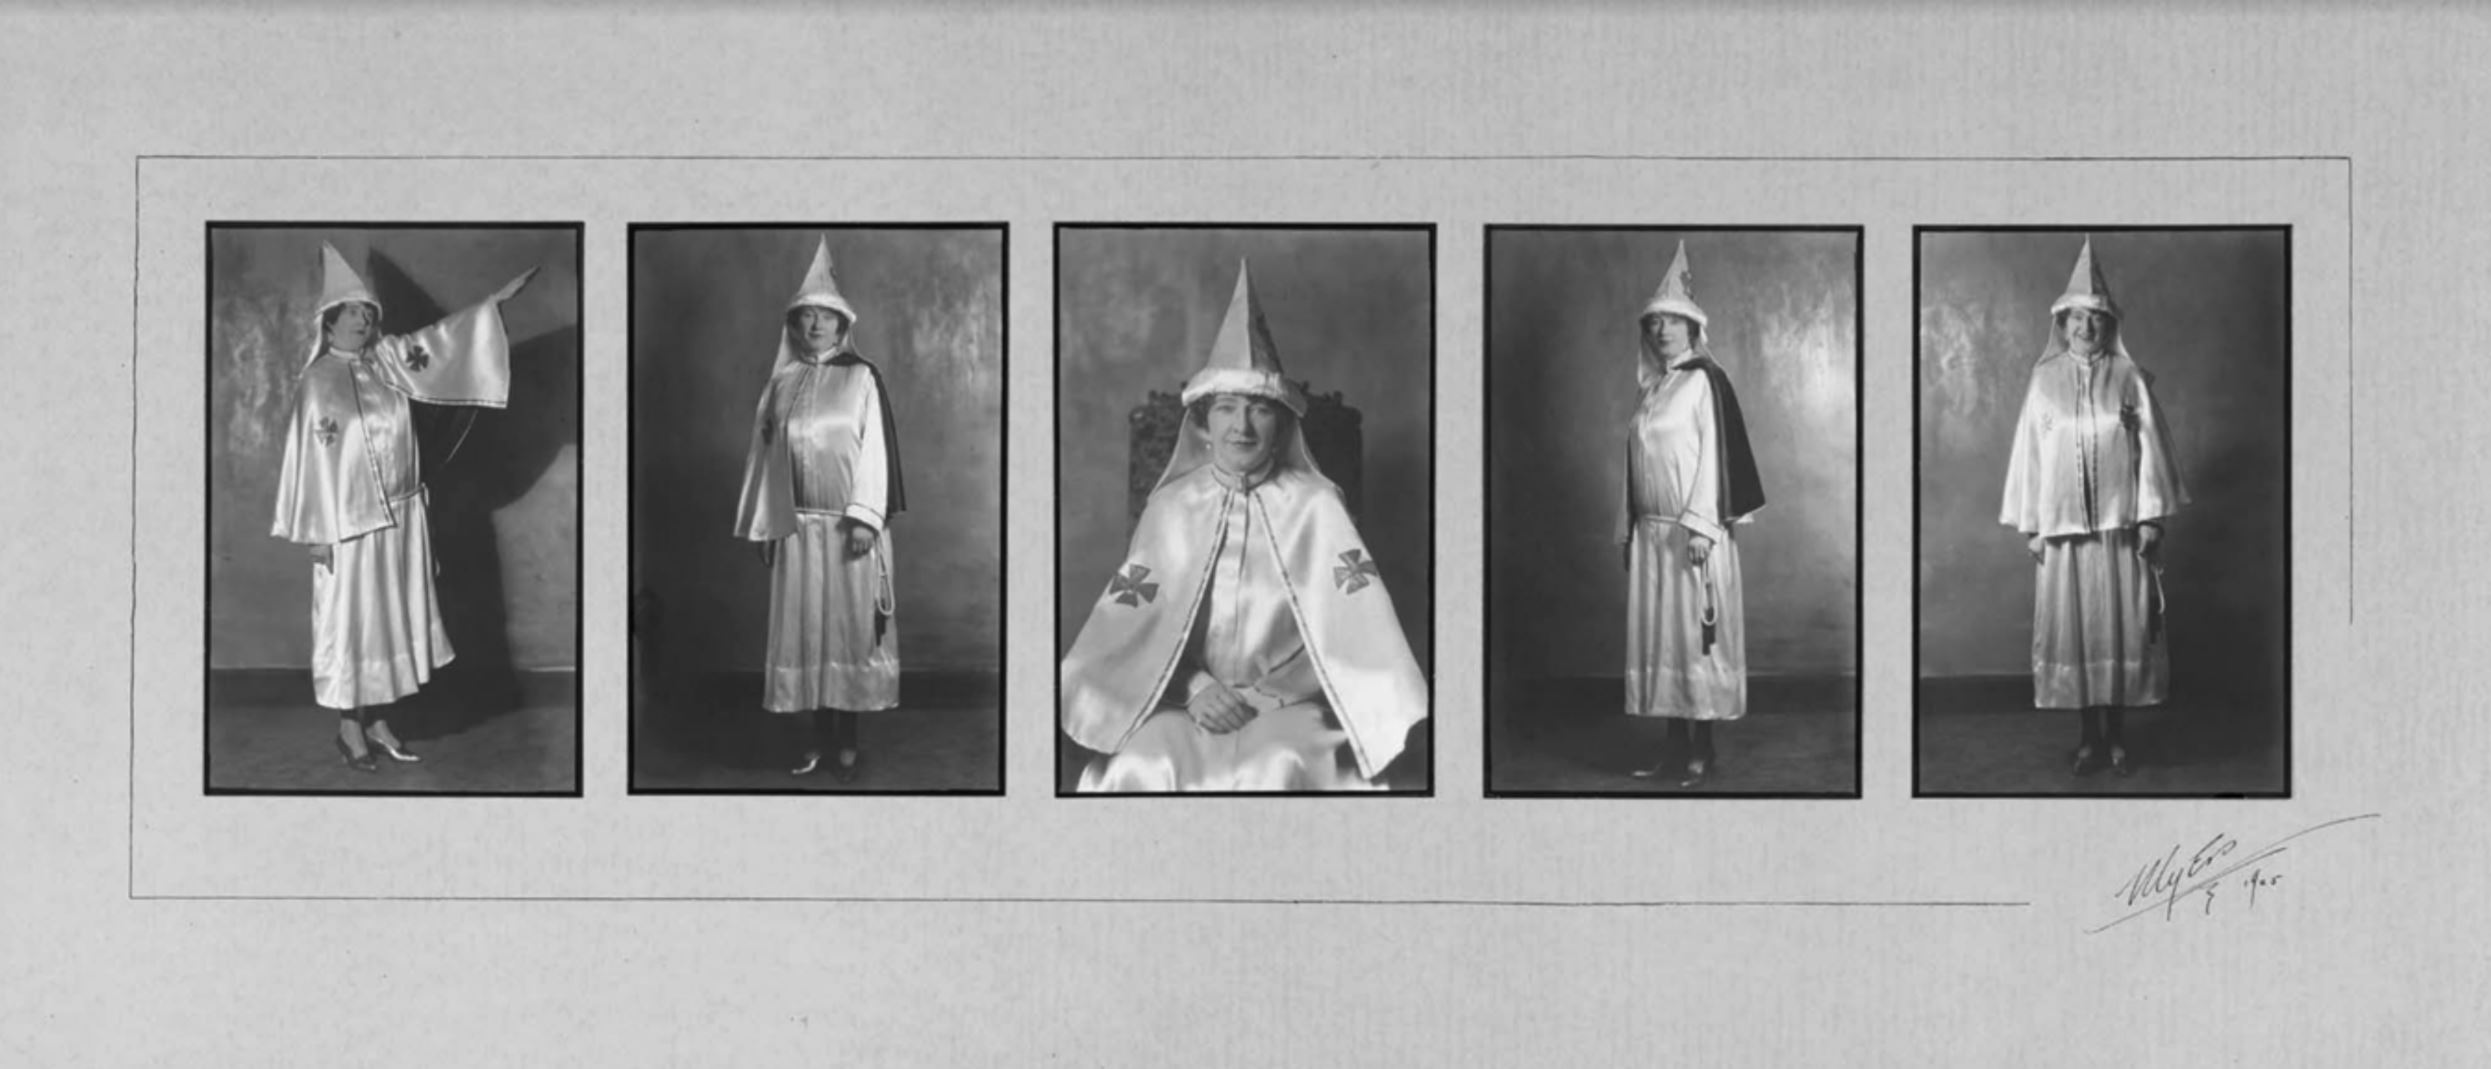 Studio portraits of a woman (Laurena Senter) in Ku Klux Klan uniform. Each portrait depicts her in a different pose, with the hood on but the facemask raised.